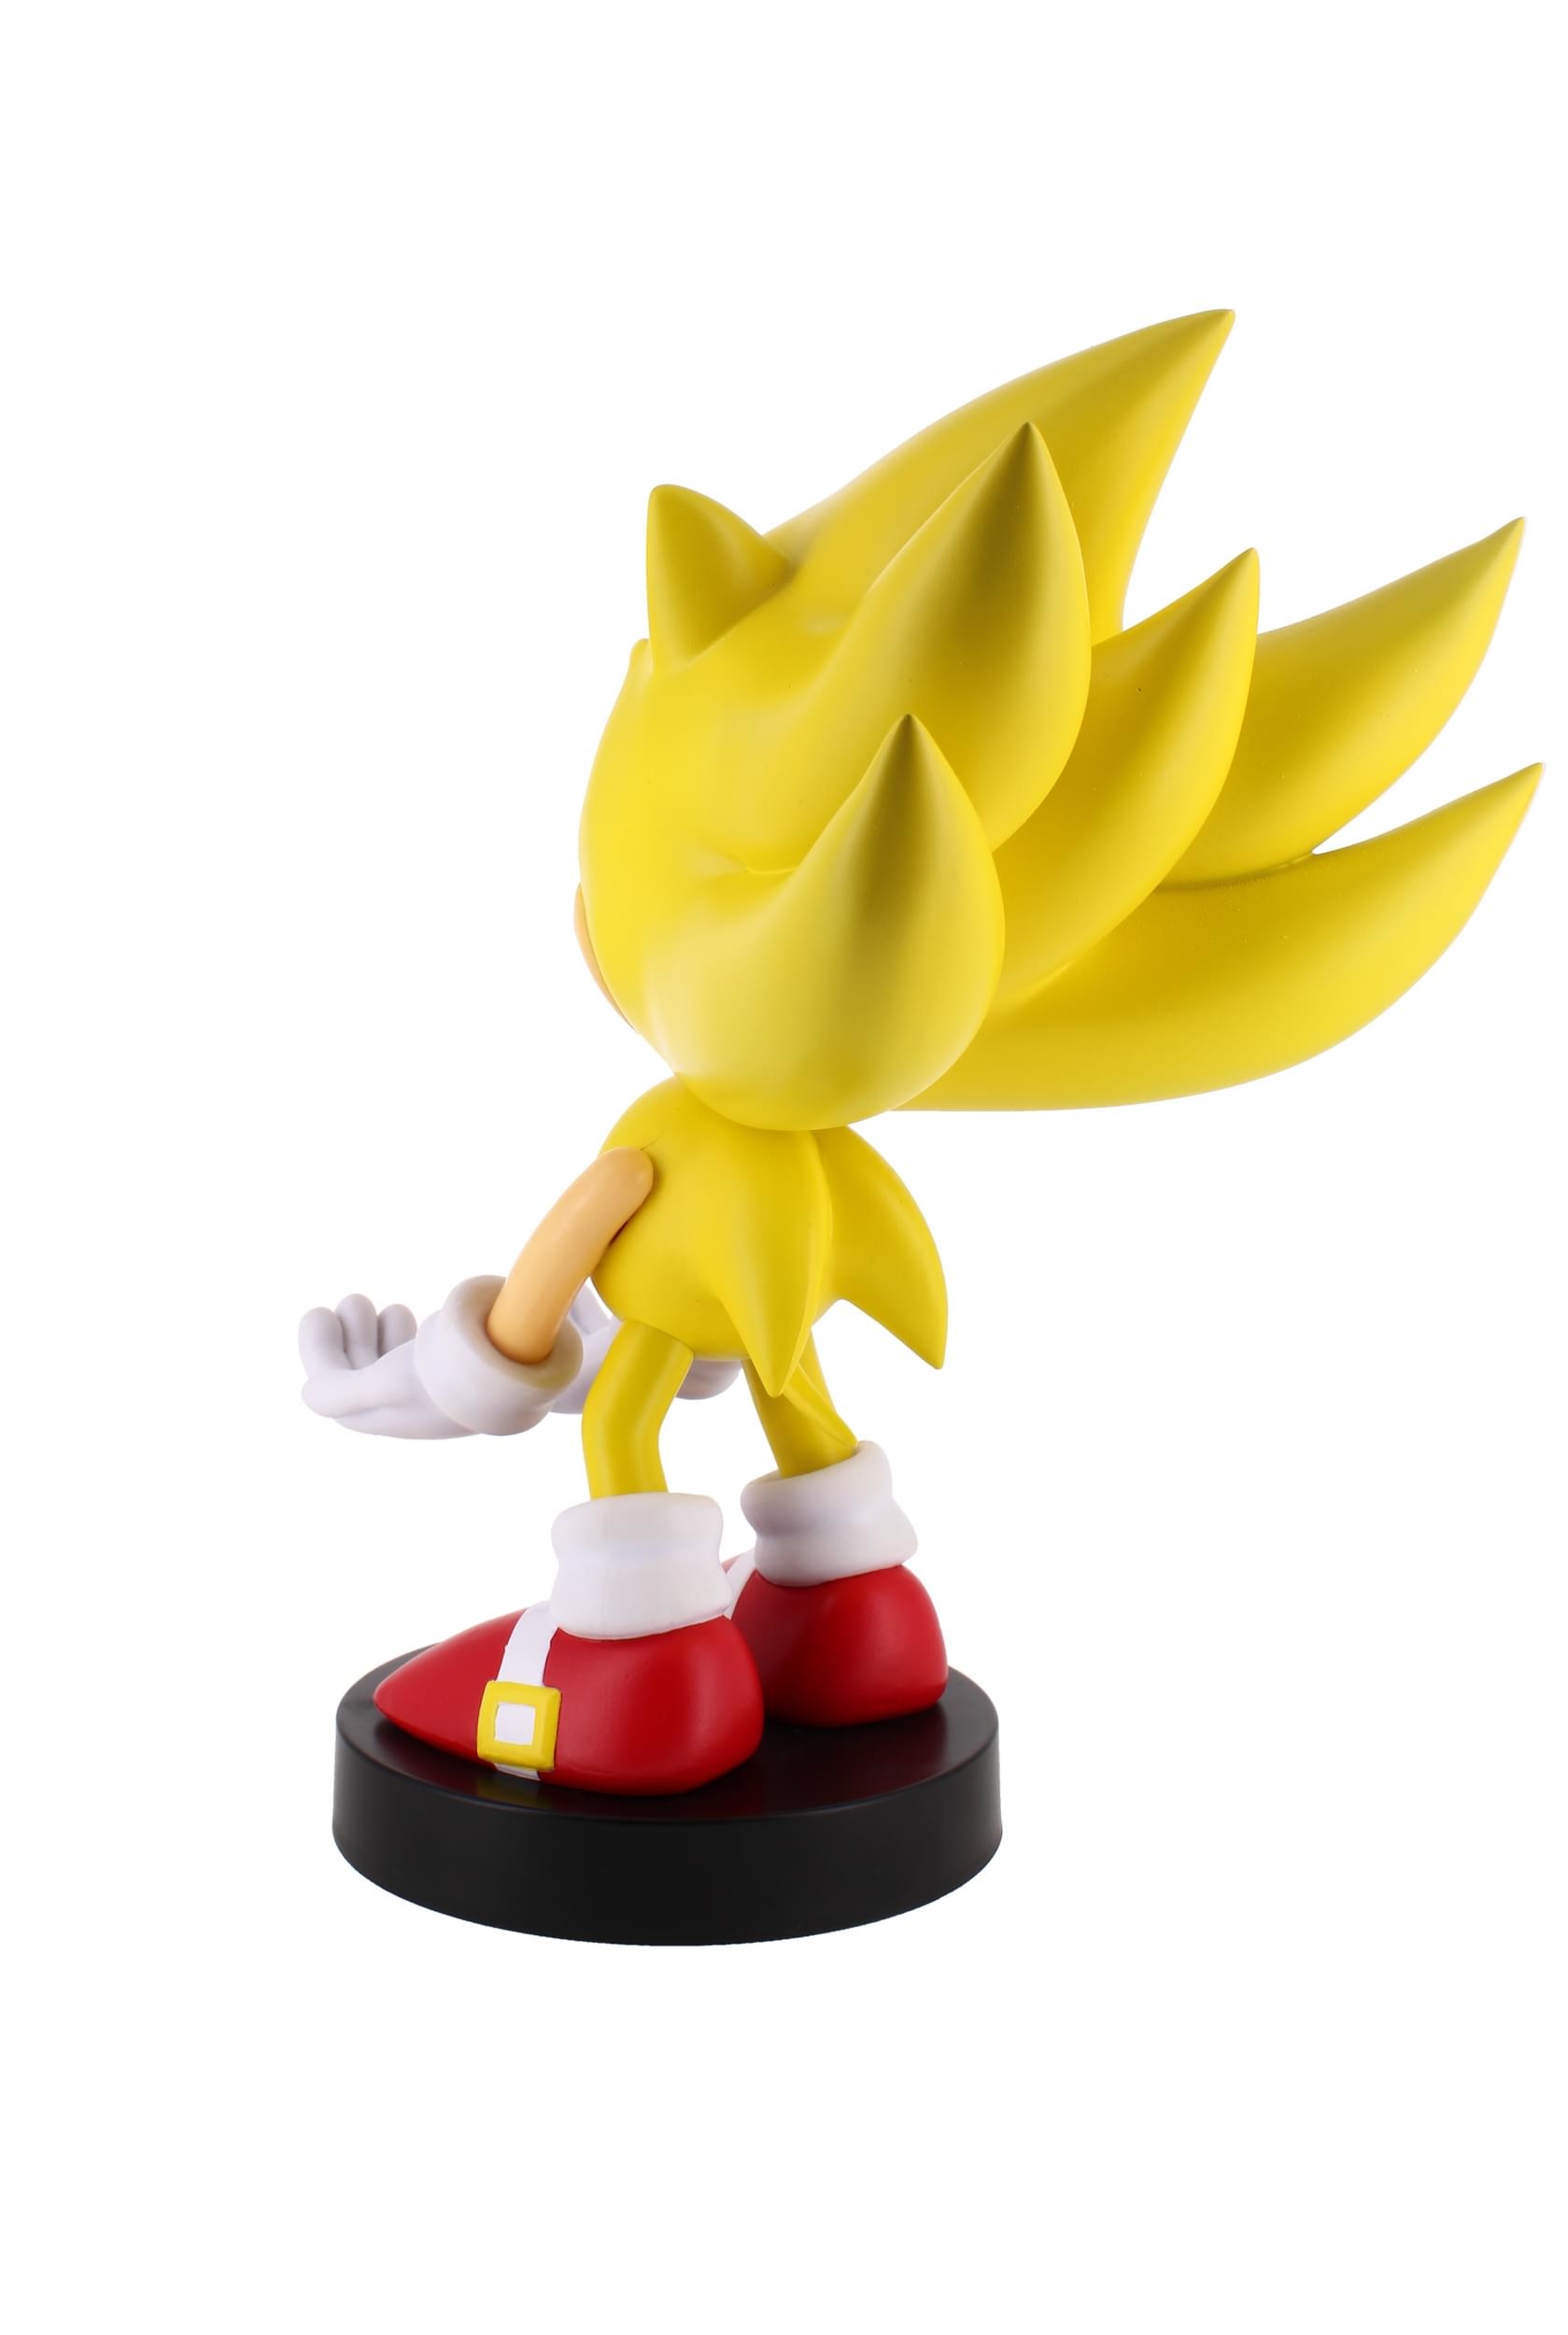 OCT228443 - SONIC THE HEDGEHOG SUPER SONIC CABLE GUY - Previews World